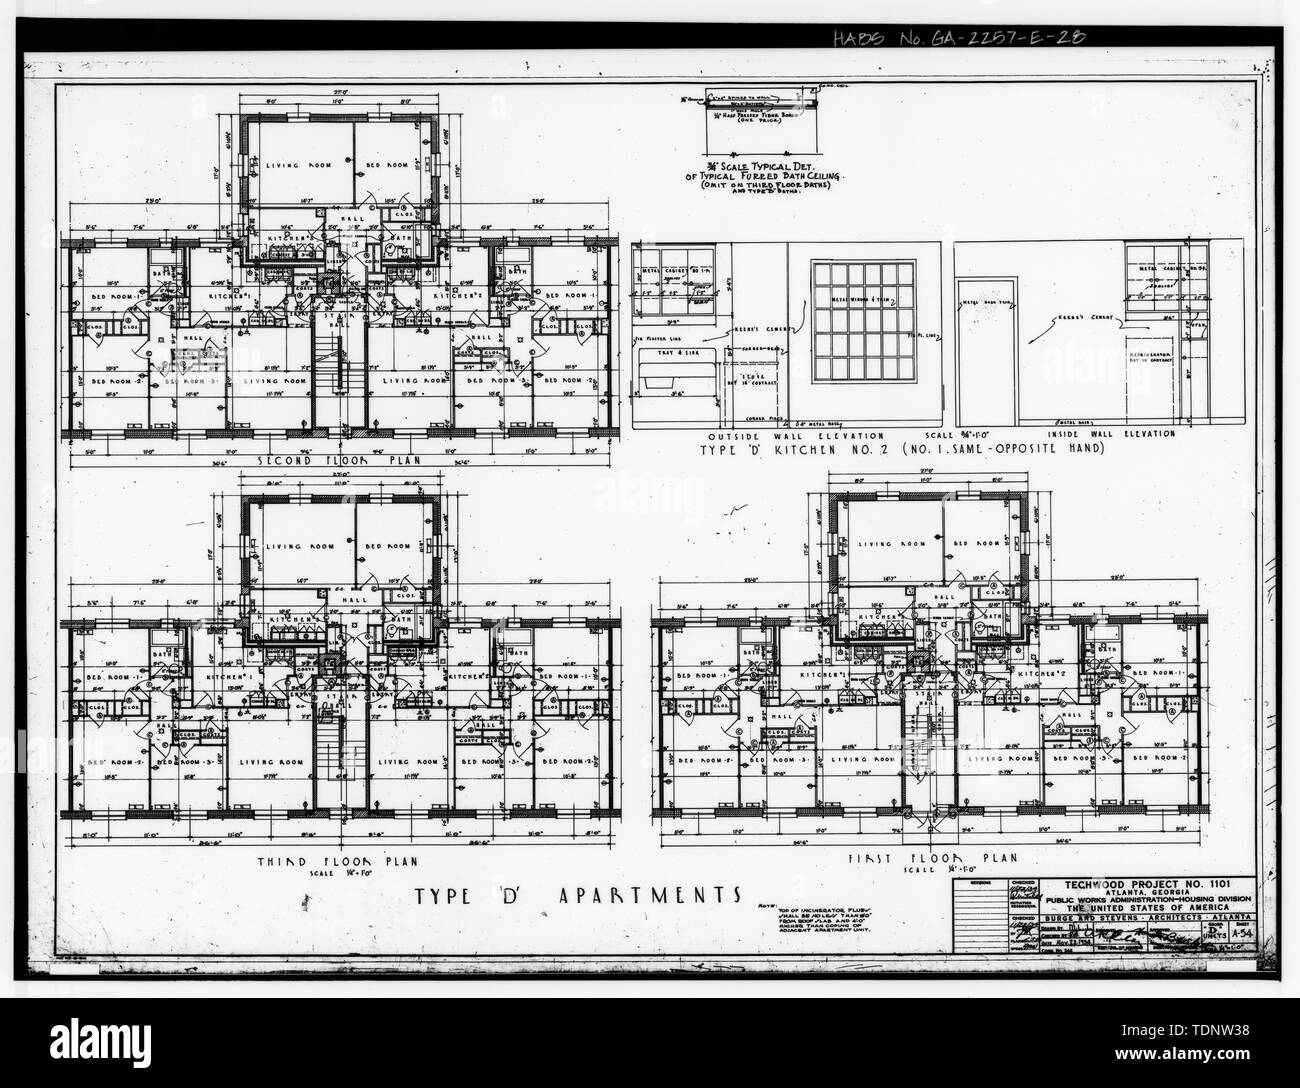 Photocopy of Drawing (November 1934 Architectural Drawings by Burge and Stevens, in Possession of the Engineering and Capital Improvements Department of the Atlanta Housing Authority, Atlanta, Georgia). FLOOR PLANS, TYPE 'D' APARTMENTS, KITCHEN ELEVATIONS, TECHWOOD PROJECT -1101, SHEET A-54. - Techwood Homes, Building No. 3, 559 Techwood Drive and 129-135 Merrit Avenue, Atlanta, Fulton County, GA Stock Photo